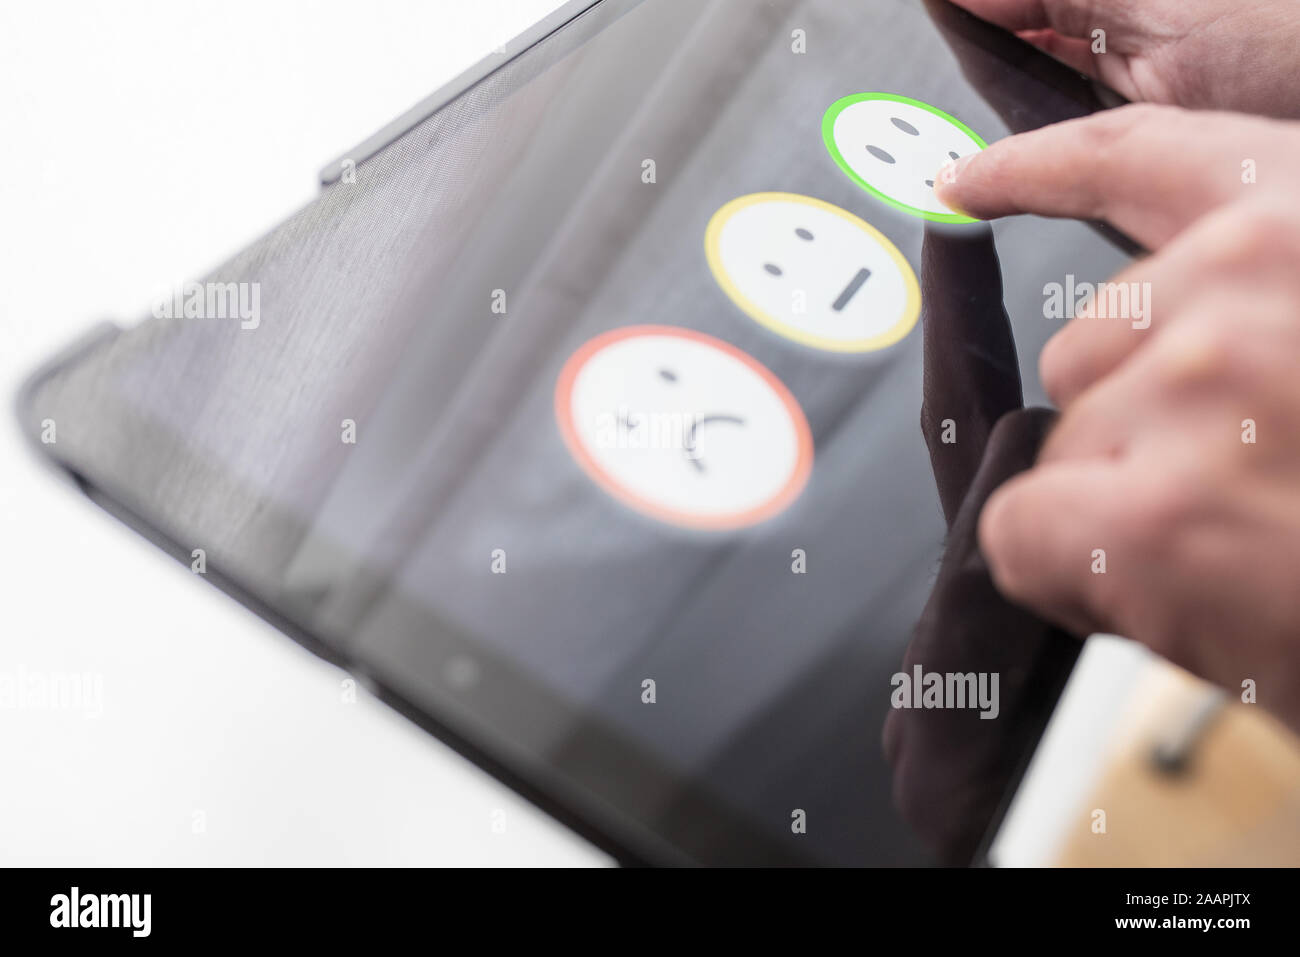 pleased person giving positive feedback by touching smiley face on digital tablet touchscreen, service quality rating concept.. Stock Photo